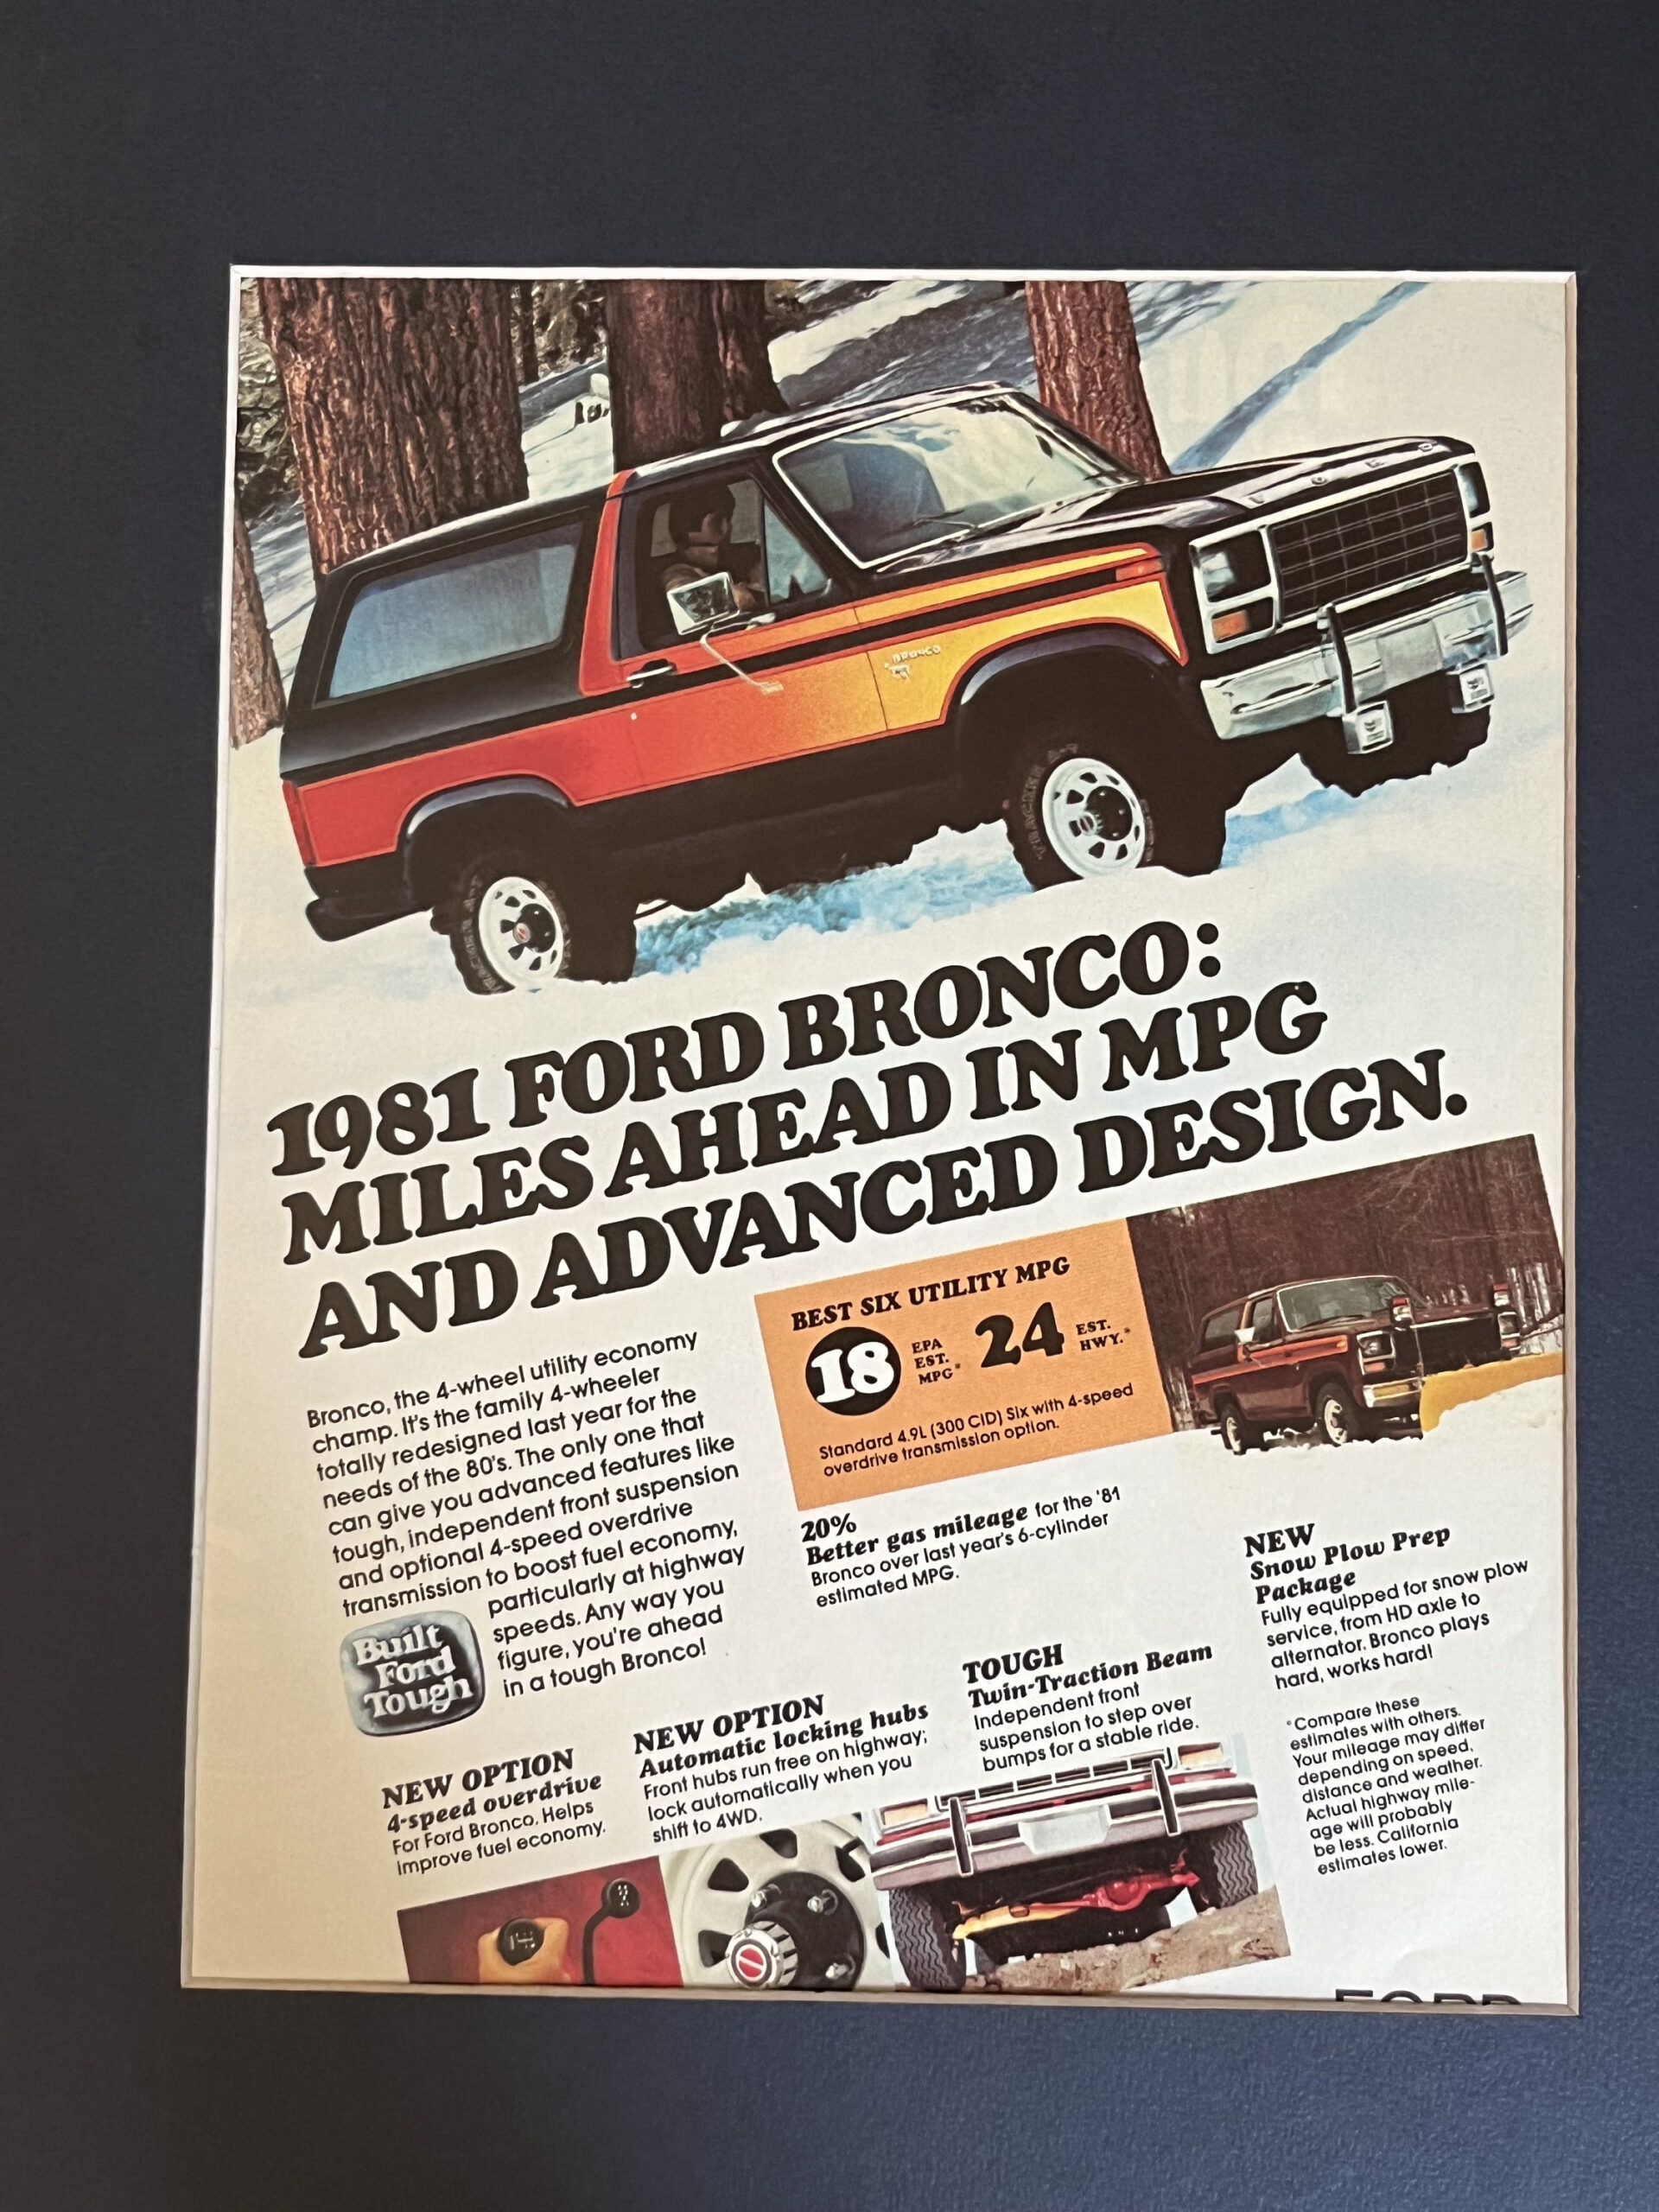 Mpg Ratings for 1981 Ford Bronco